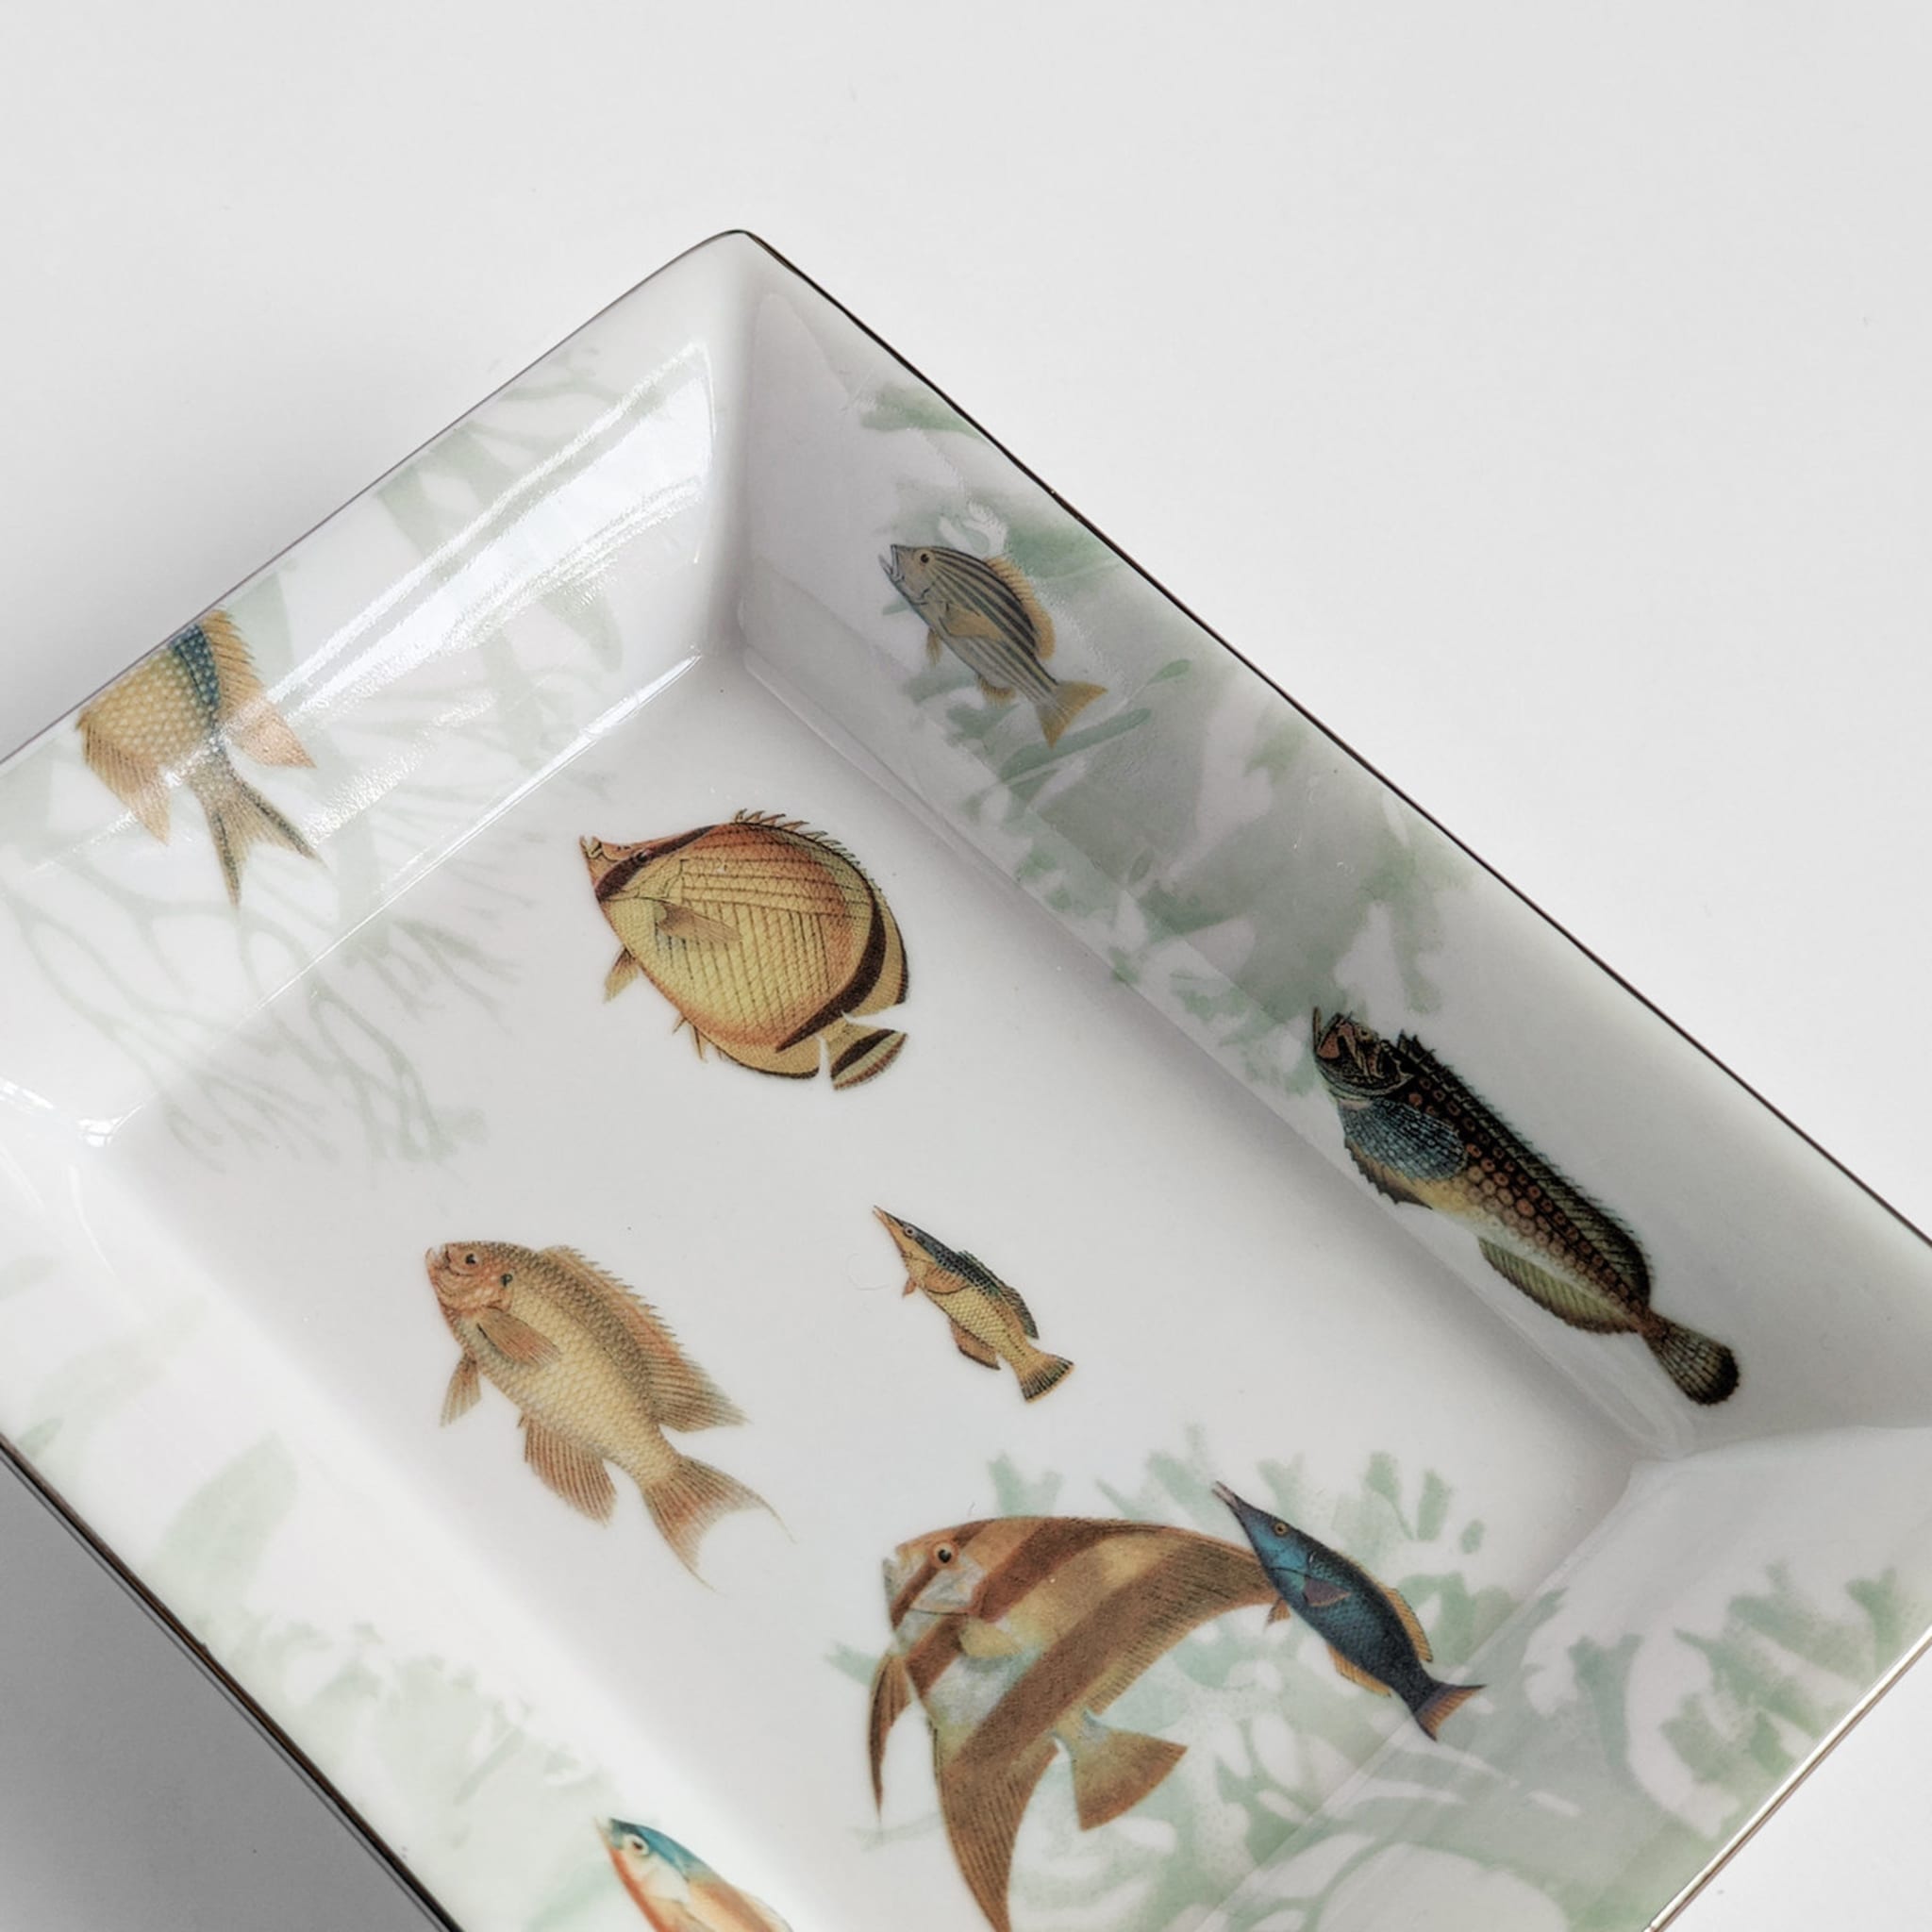 Amami Set Of Porcelain Ashtray And Vide-Poche With Tropical Fish - Alternative view 5